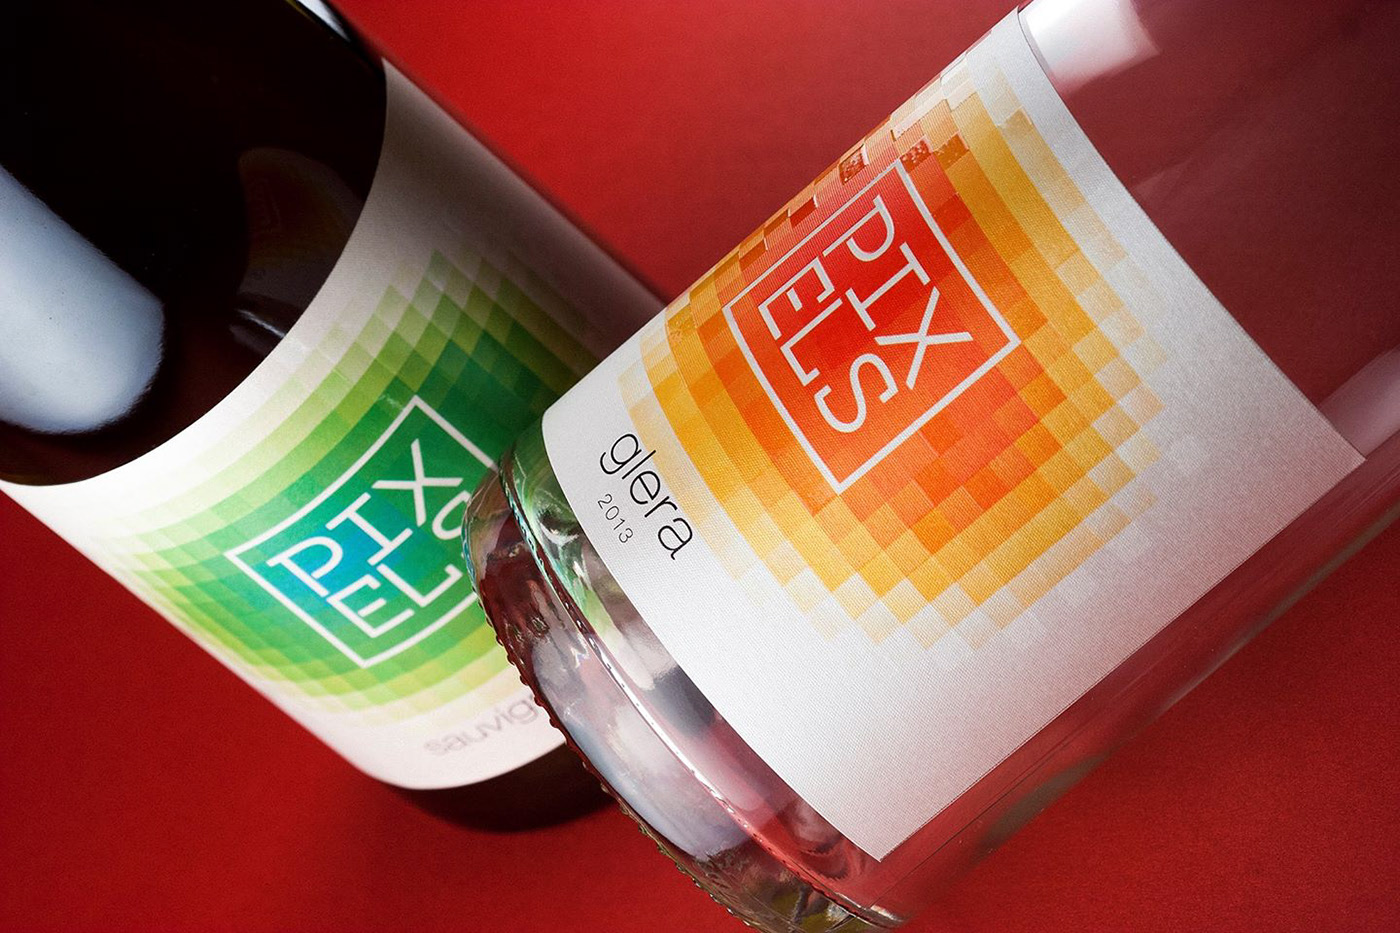 PIXELS wines by the Labelmaker on Behance